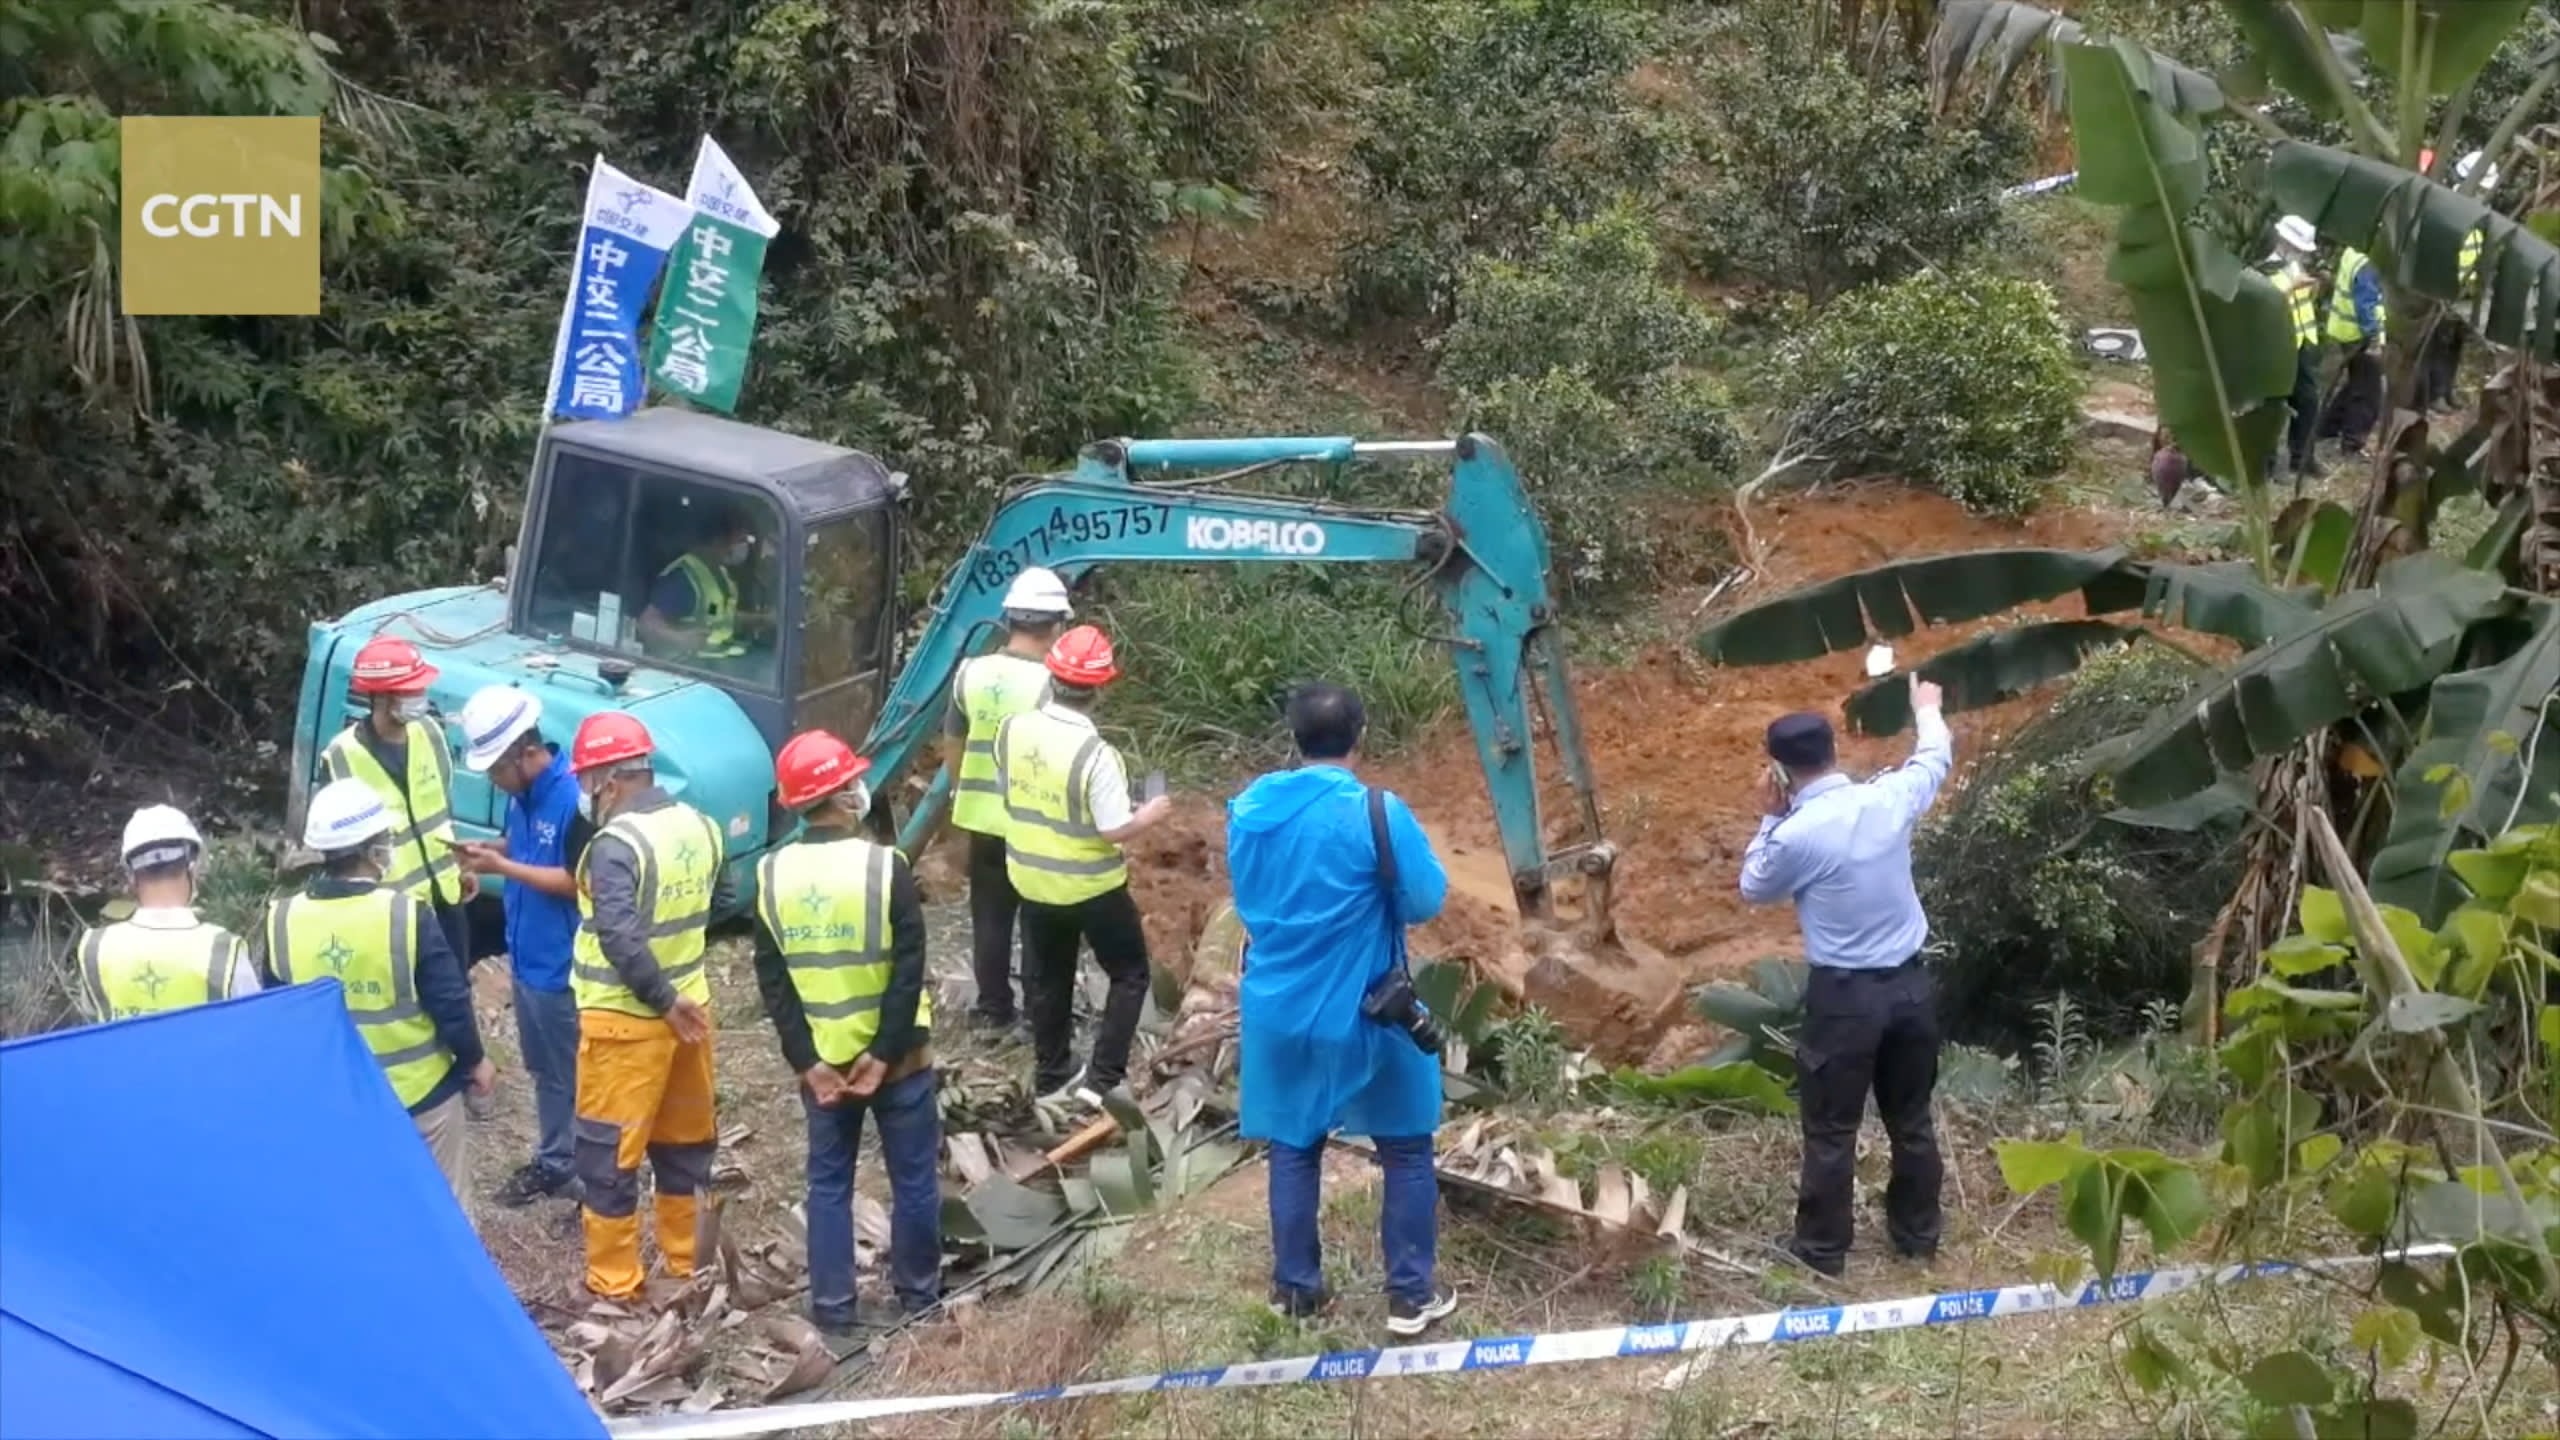 Rescuers work at the site where a China Eastern Airlines Boeing 737-800 plane, flight MU5735, crashed in Wuzhou,China, on March 22, 2022.